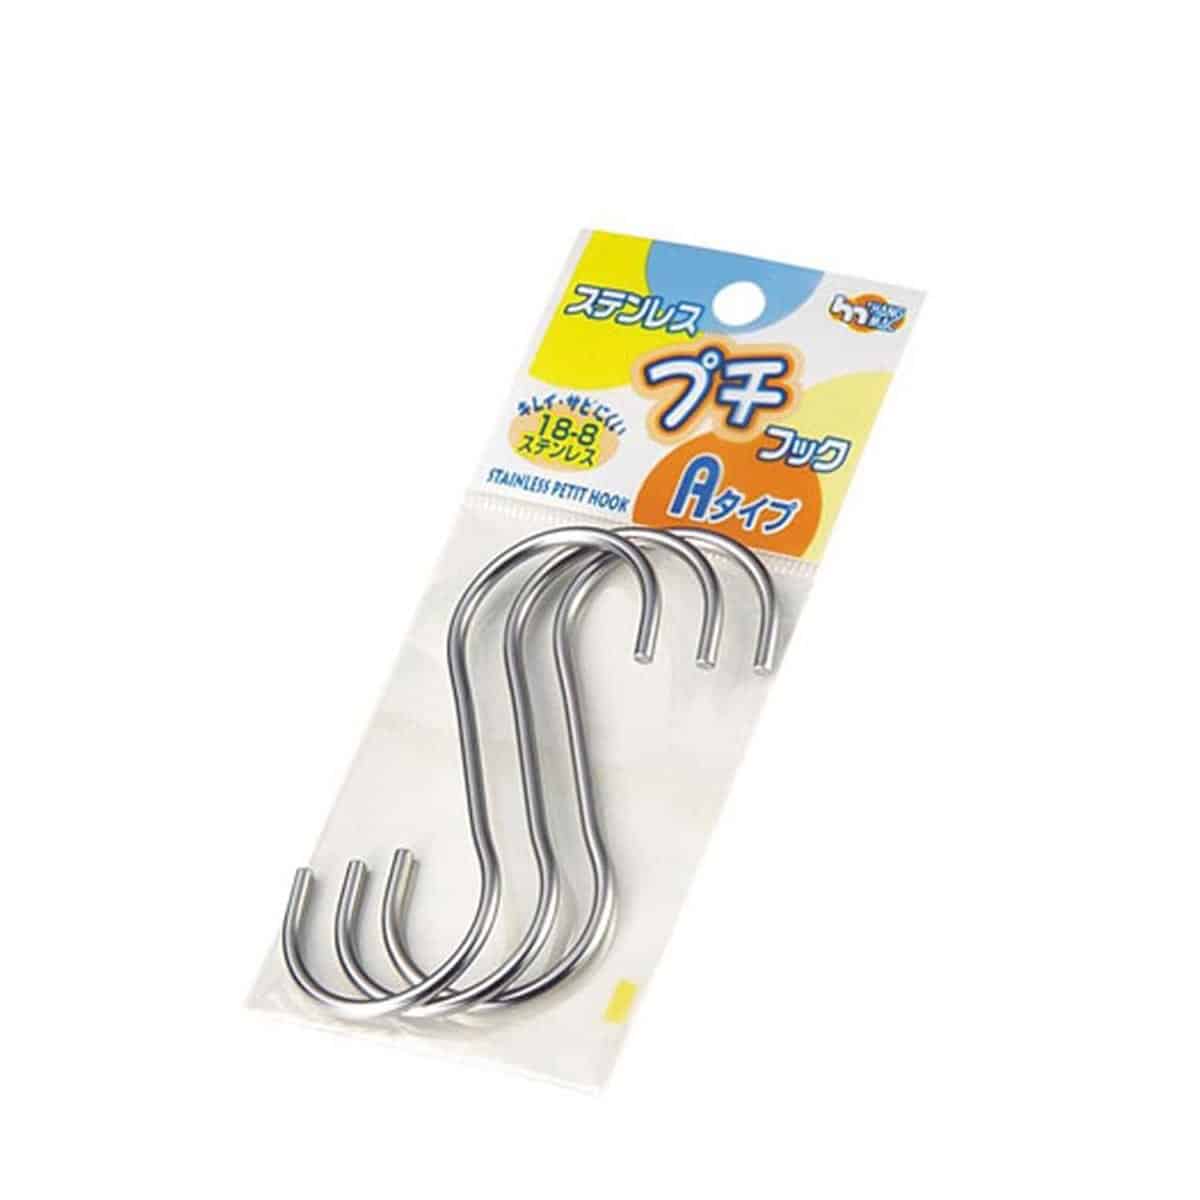 Japanese Stainless Steel Mini Hook Type A (3p)